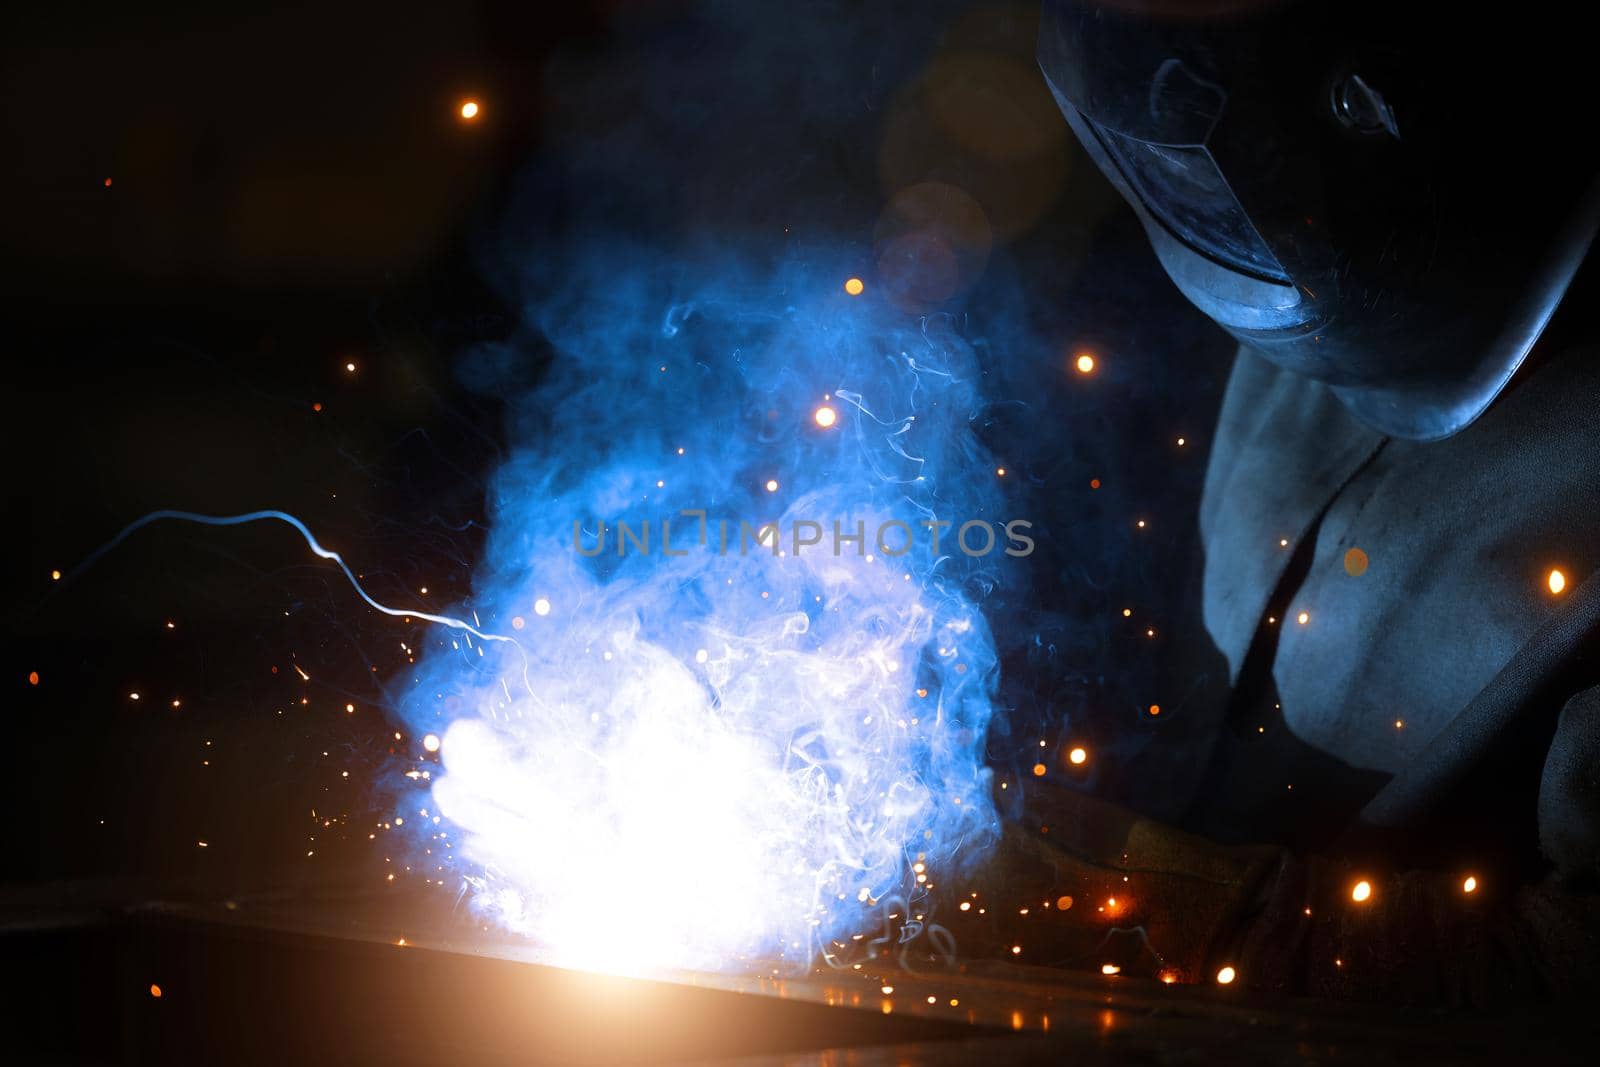 Welder at work. Welding of metal sparks and smoke in the workshop. Industrial Welder With gas Torch in Protective Helmet, welding metal profiles. The welding operation at construction site by EvgeniyQW